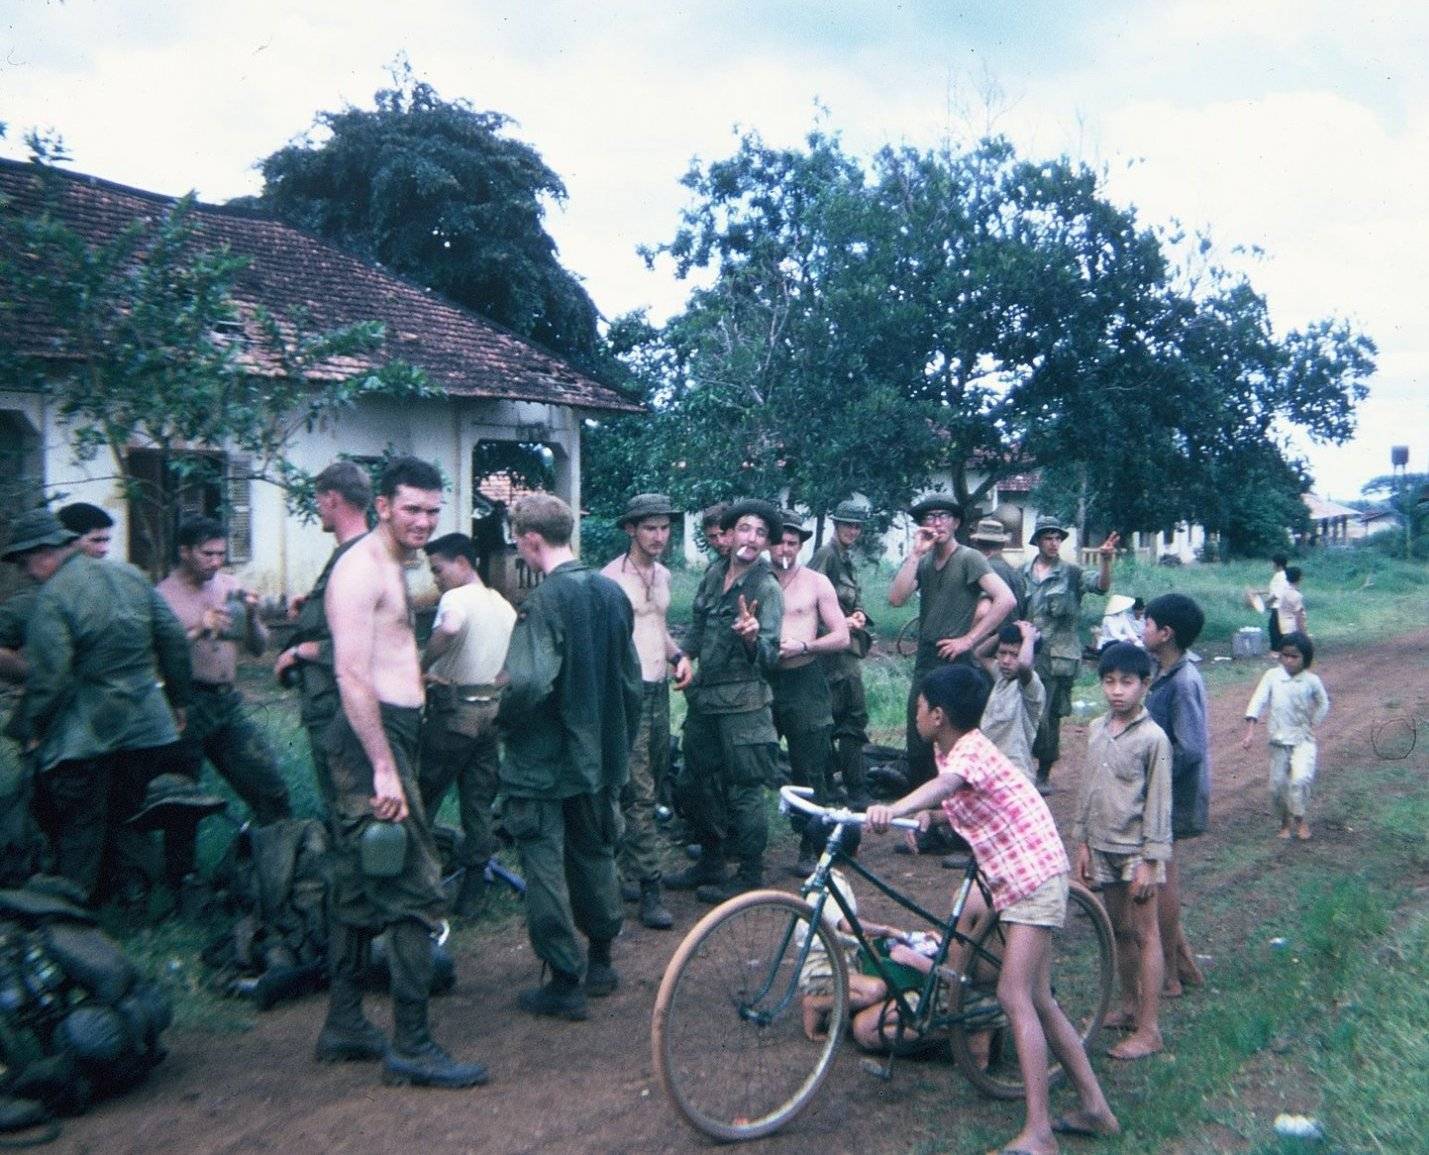 Group of U.S. soldiers in a Vietnamese village, children standing nearby.